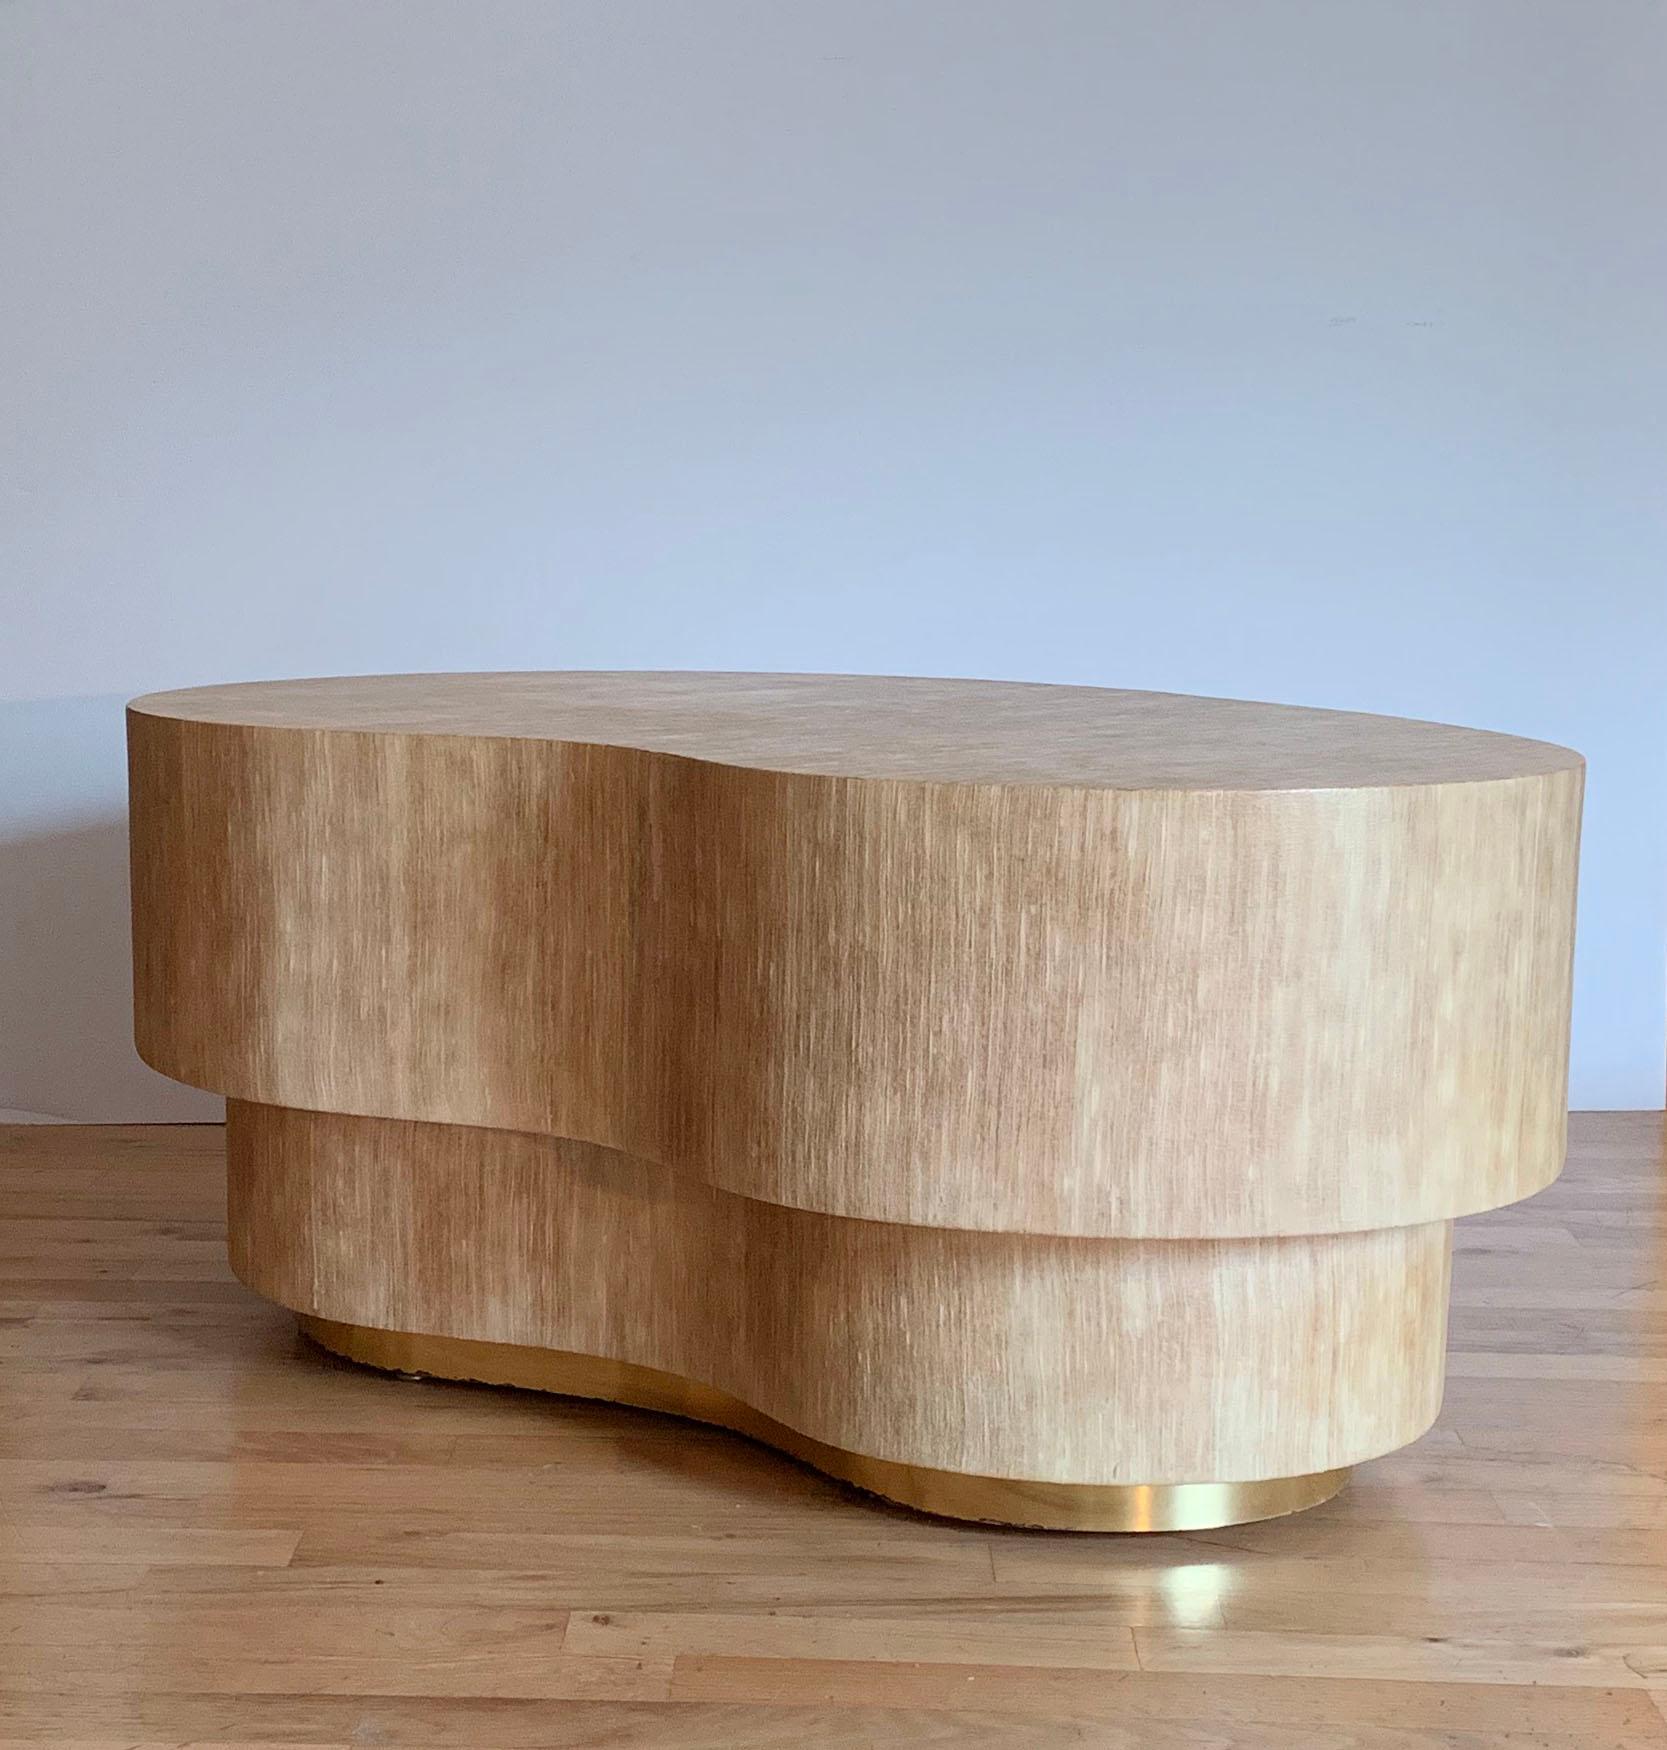 20th Century Vintage Kidney Coffee Table Wrapped in a Natural Linen